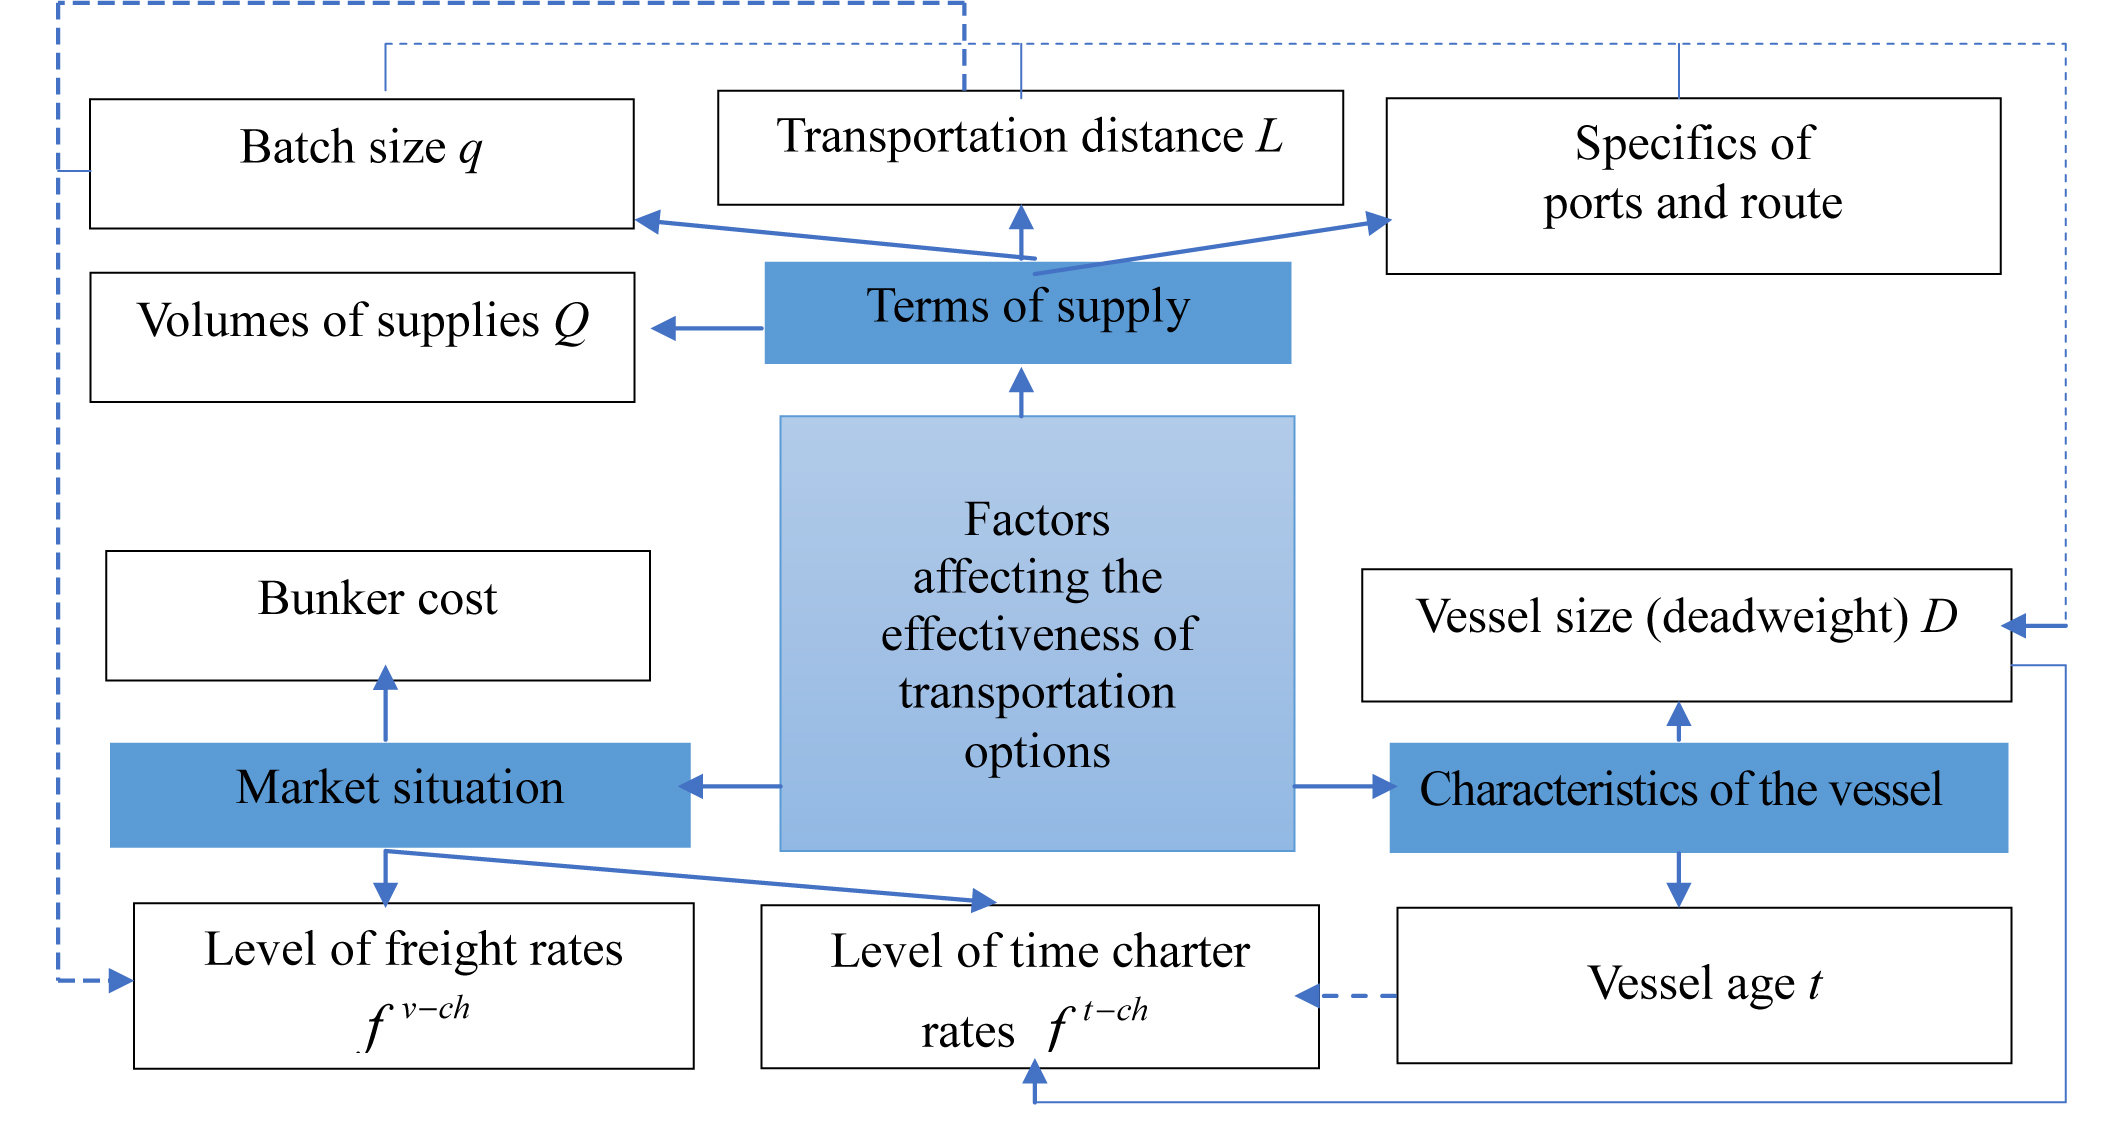 Justification of the optimal option and transportation parameters for export supplies using marine transport